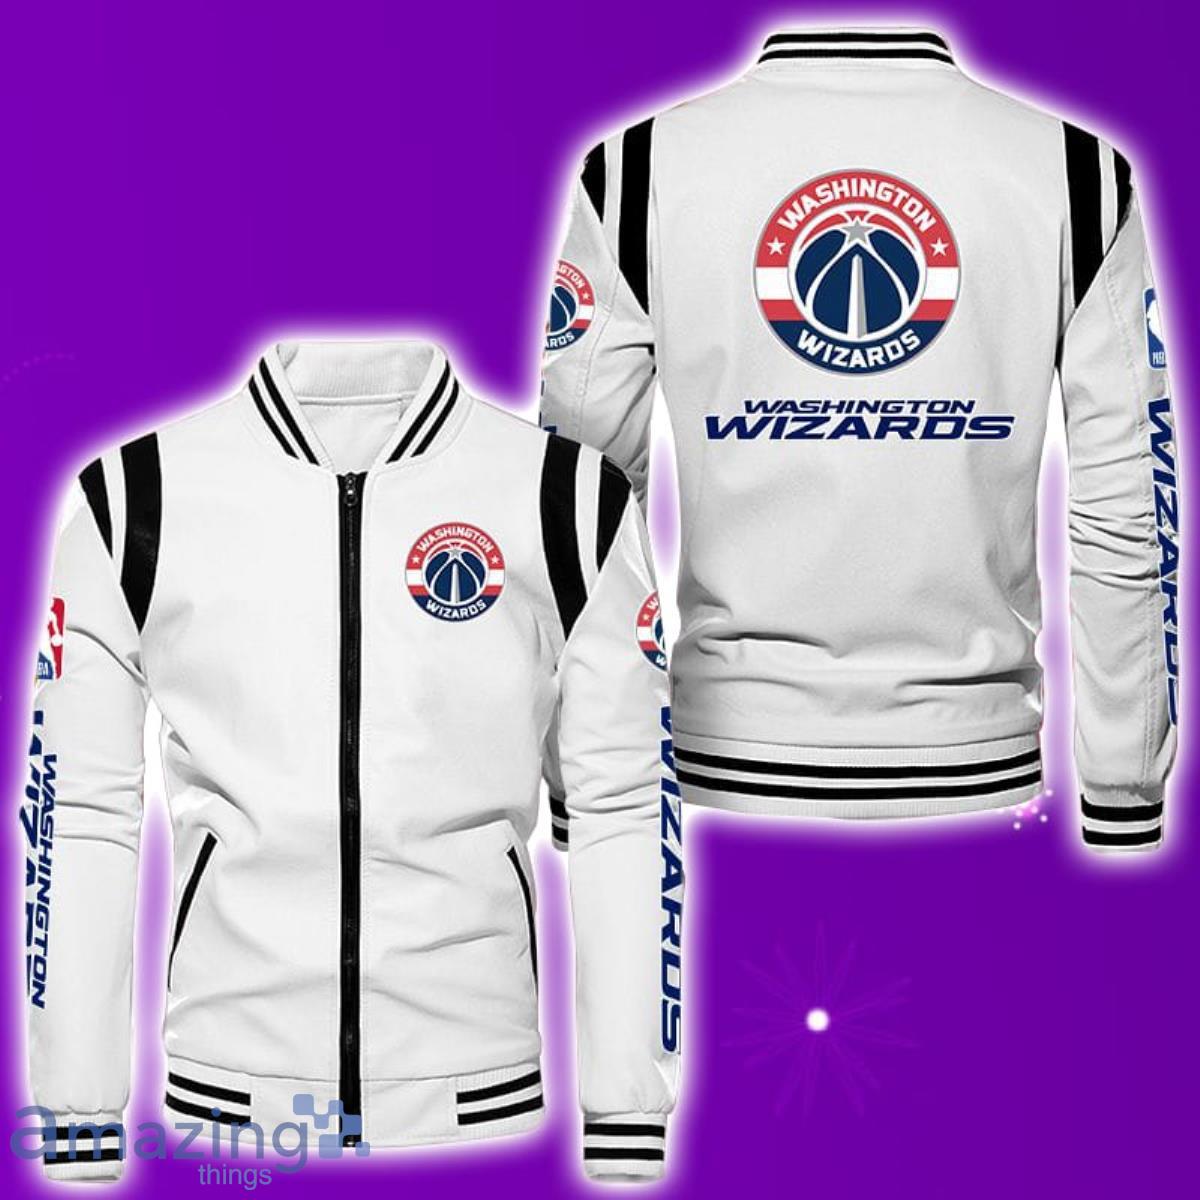 Washington Wizards Leather Bomber Jacket Best Gift For Men And Women Fans